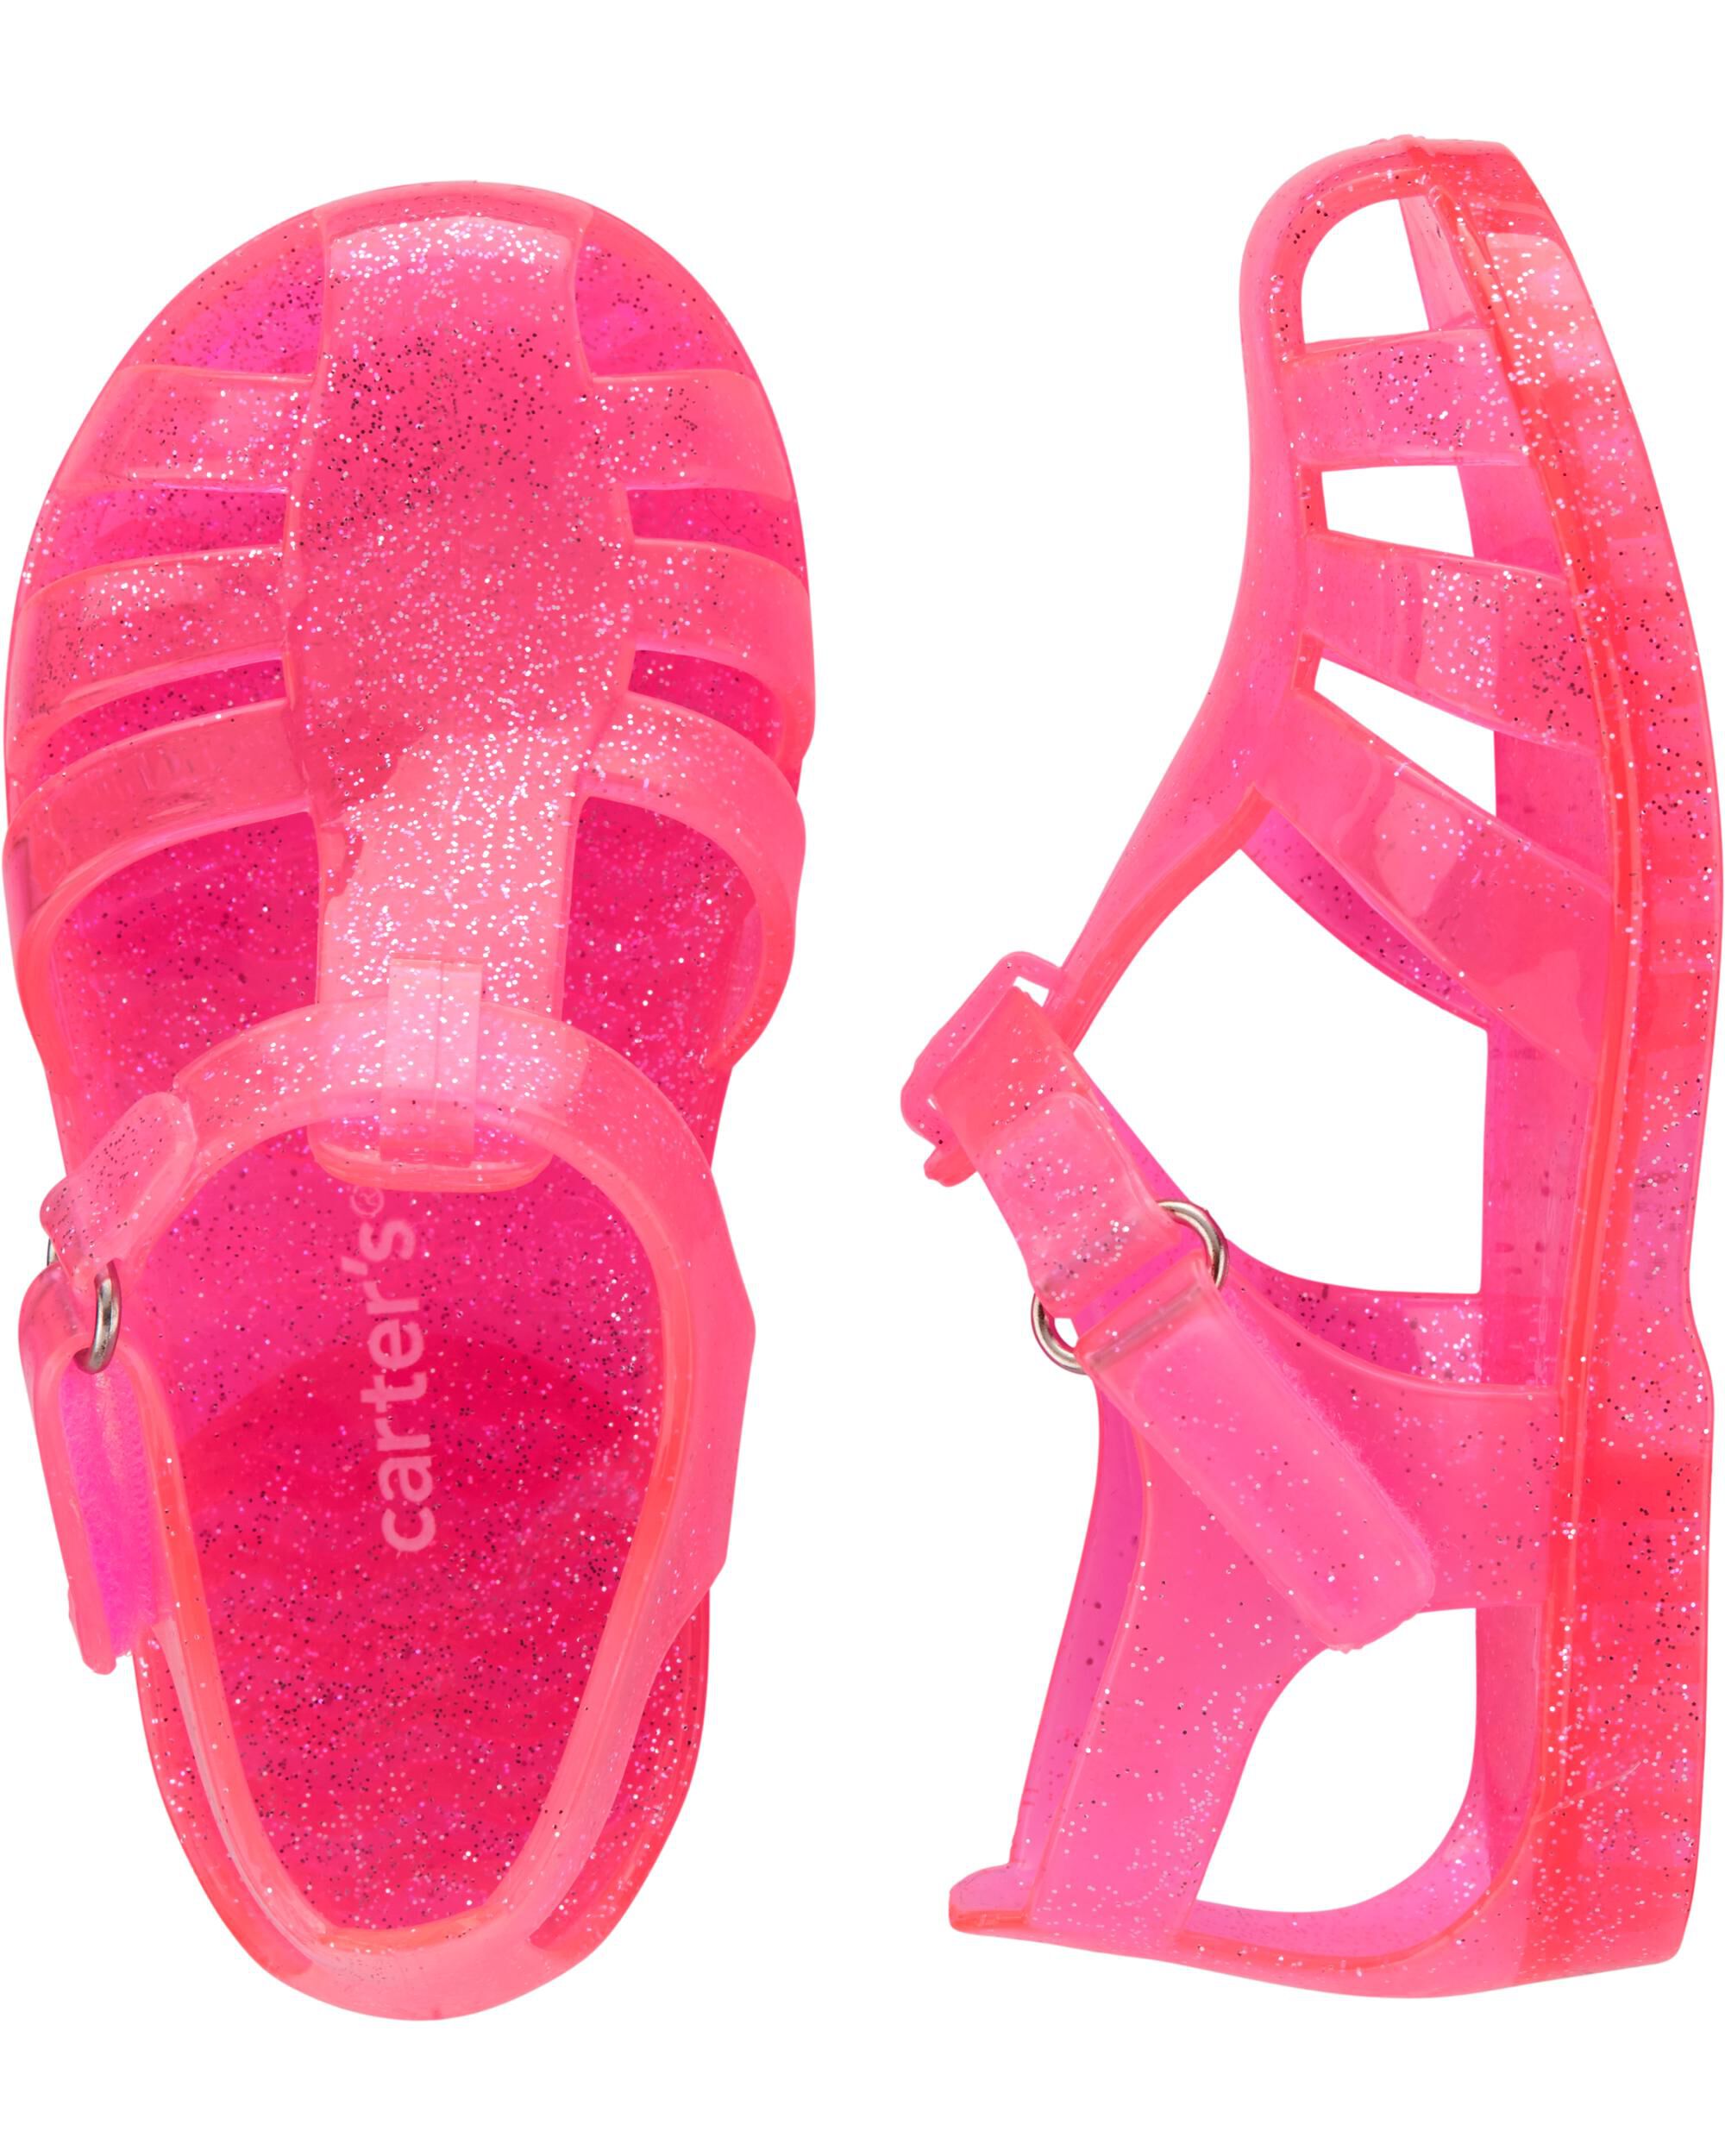 carters jelly sandals